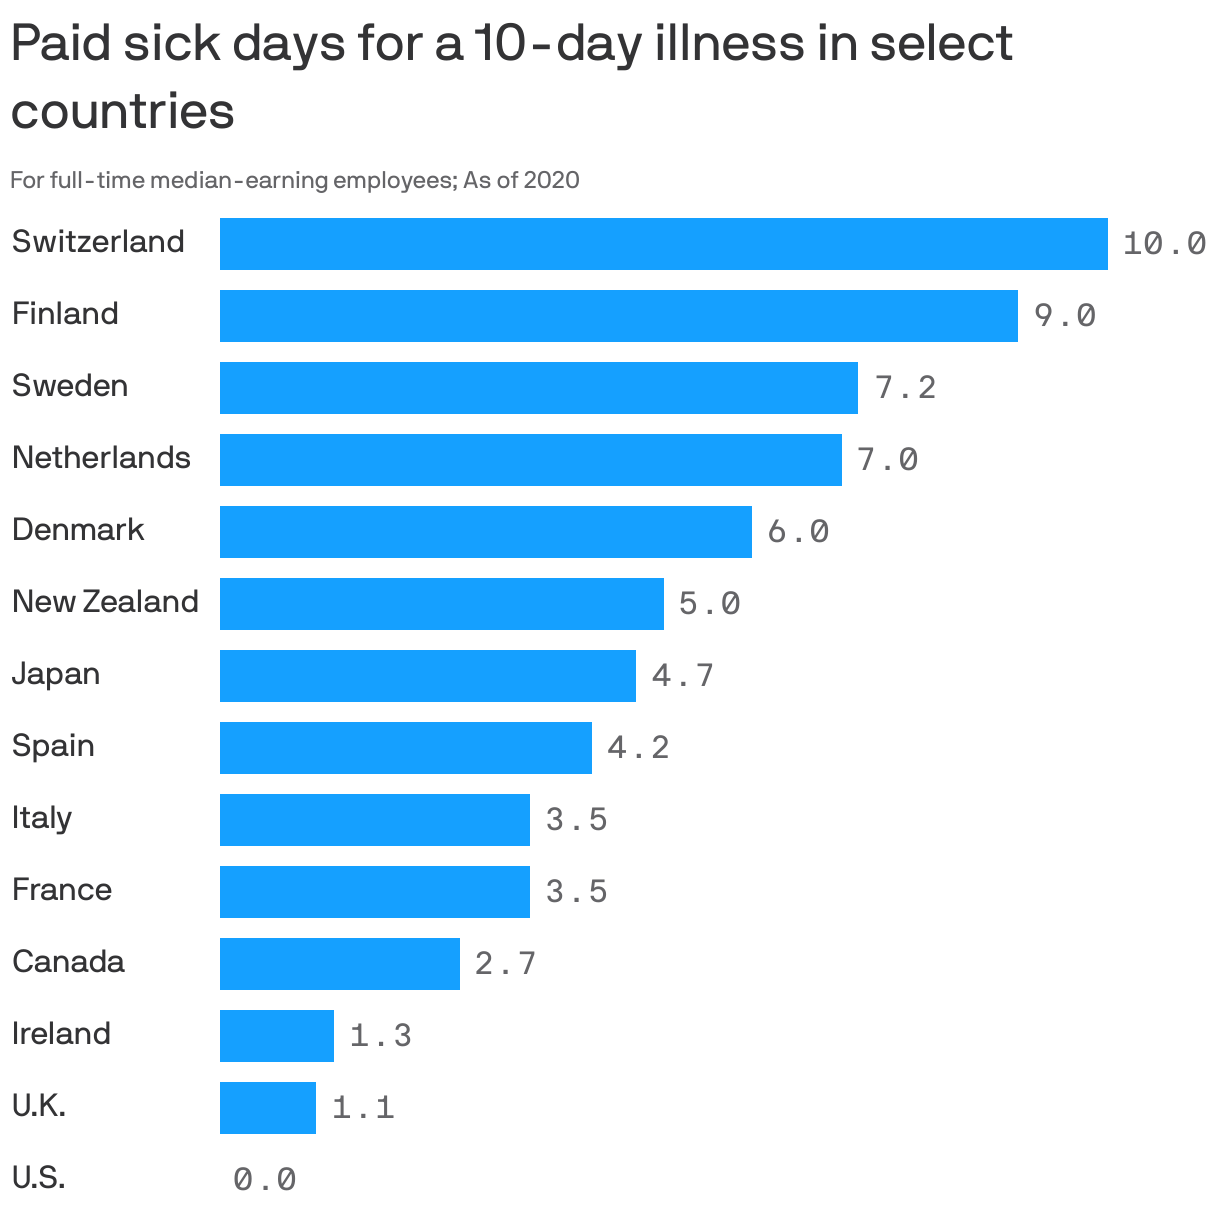 Paid sick days for a 10-day illness in select countries